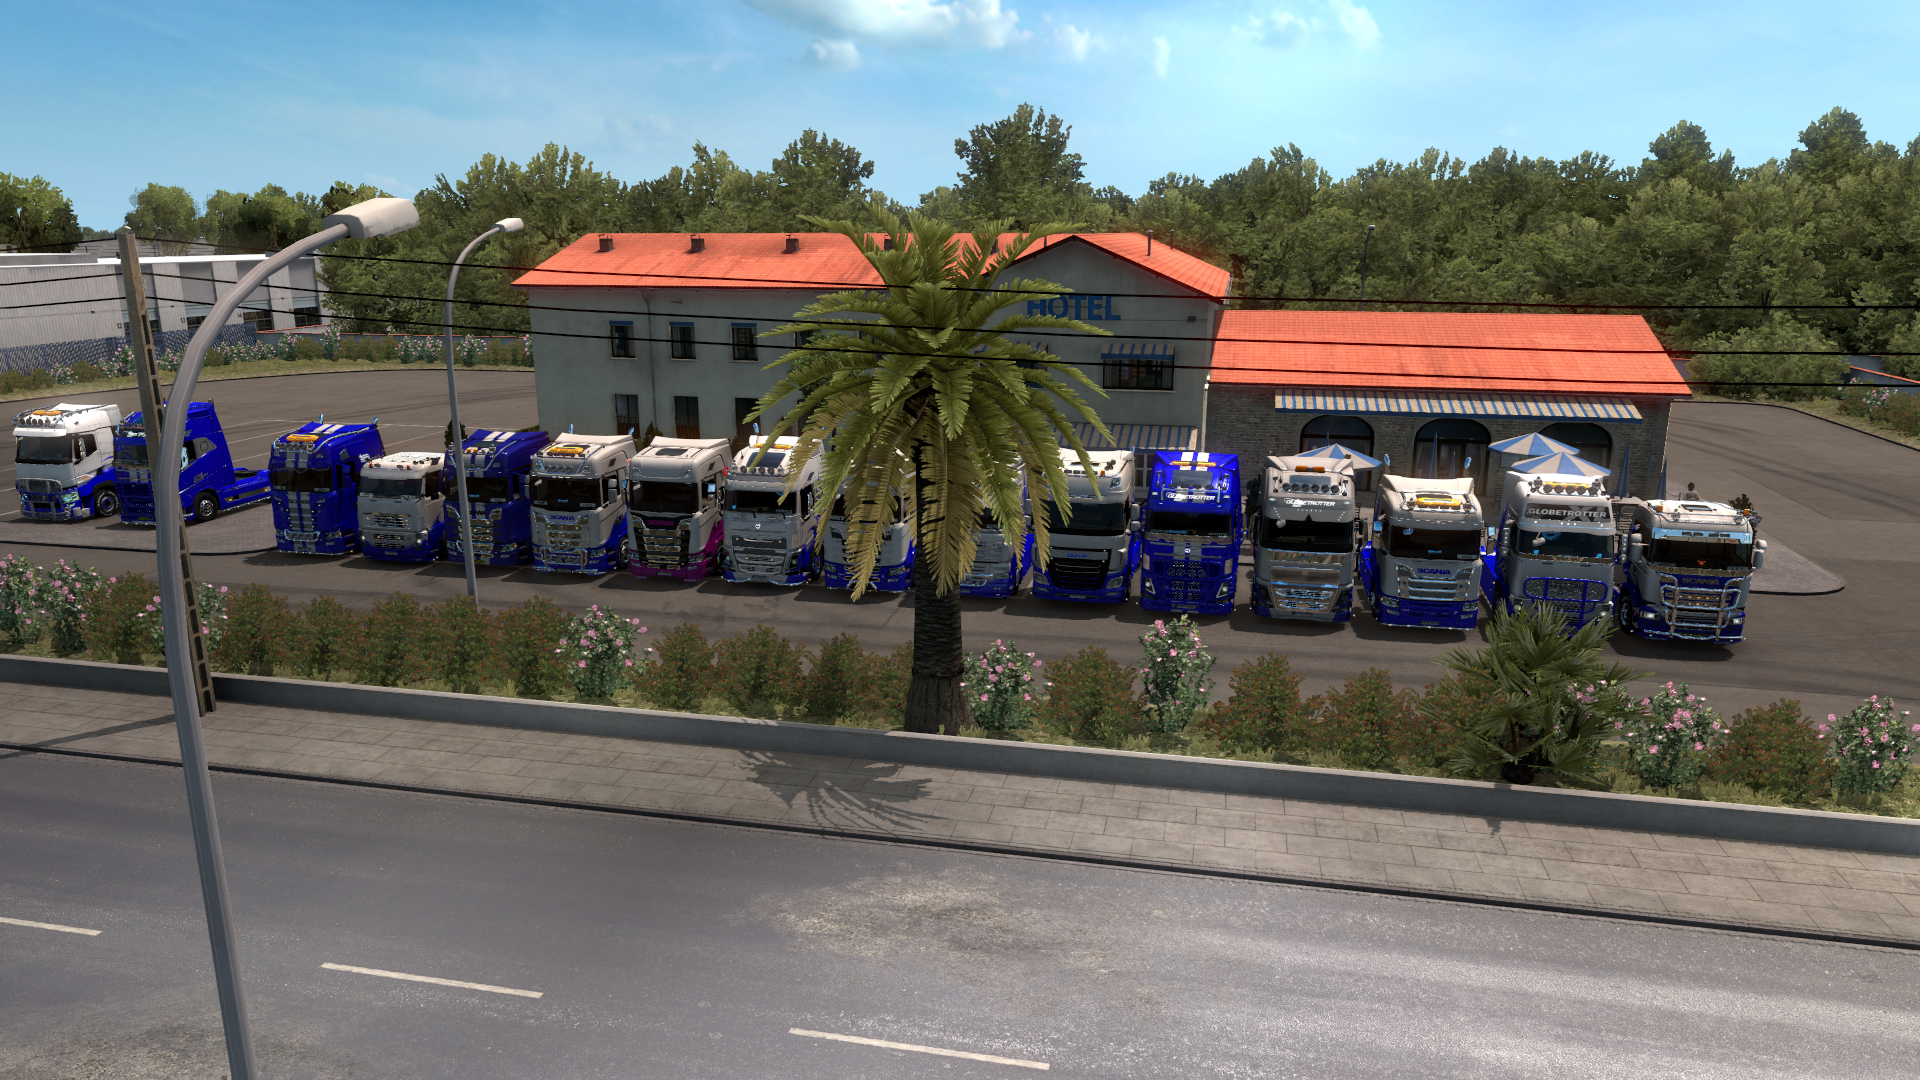 ets2_20210402_235917_00.png